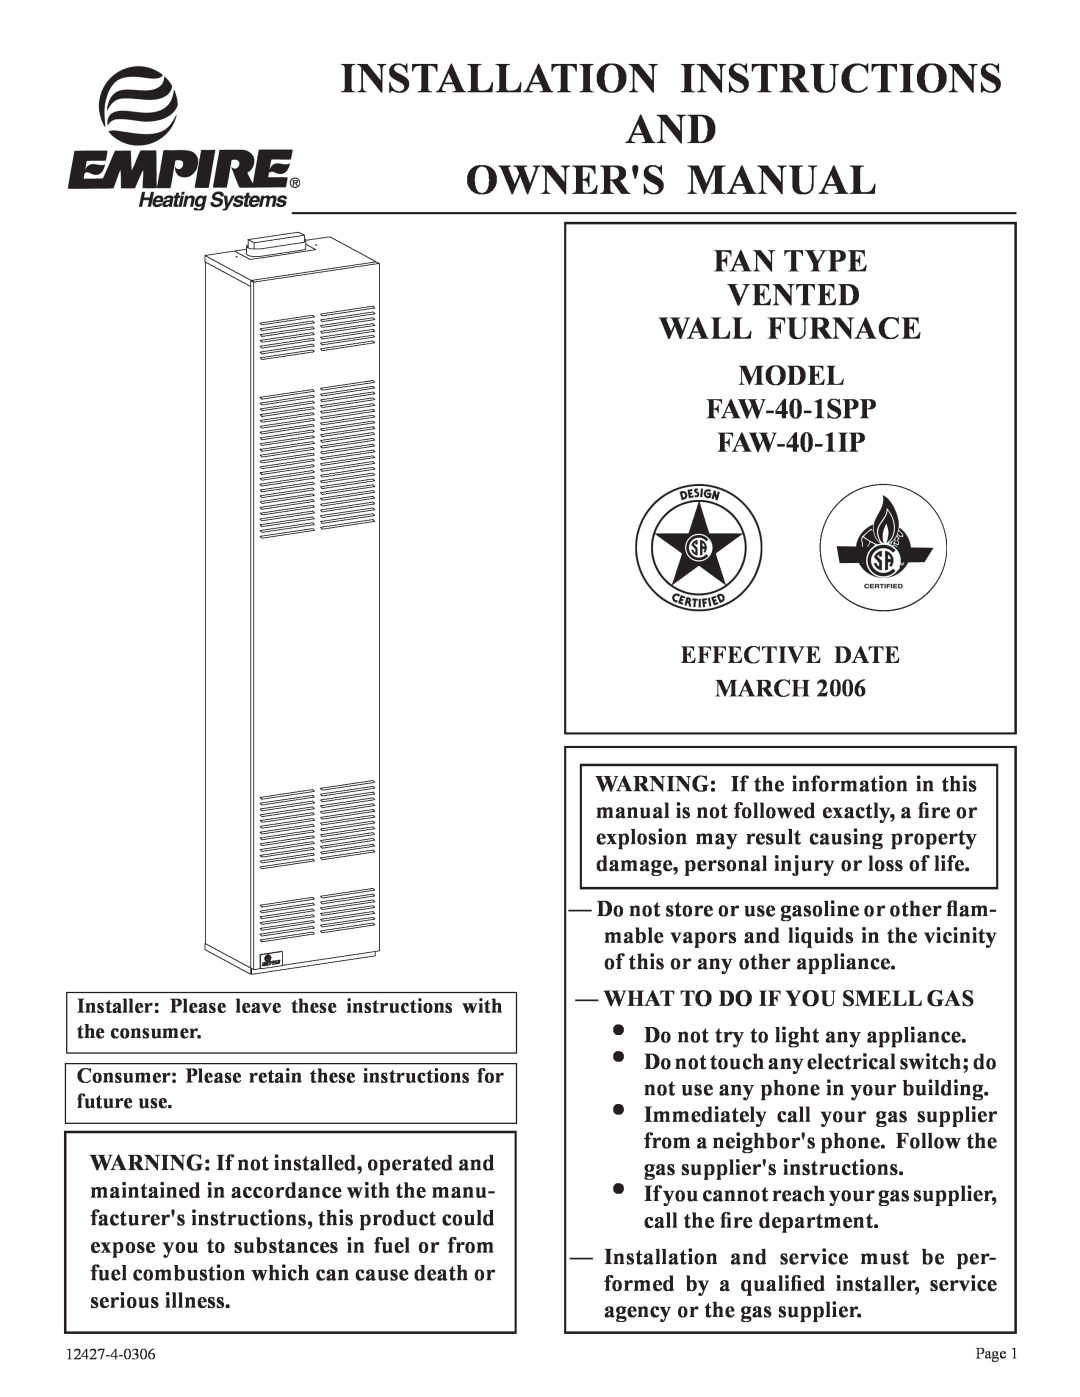 Empire Products installation instructions Fan Type Vented Wall Furnace, MODEL FAW-40-1SPP FAW-40-1IP 